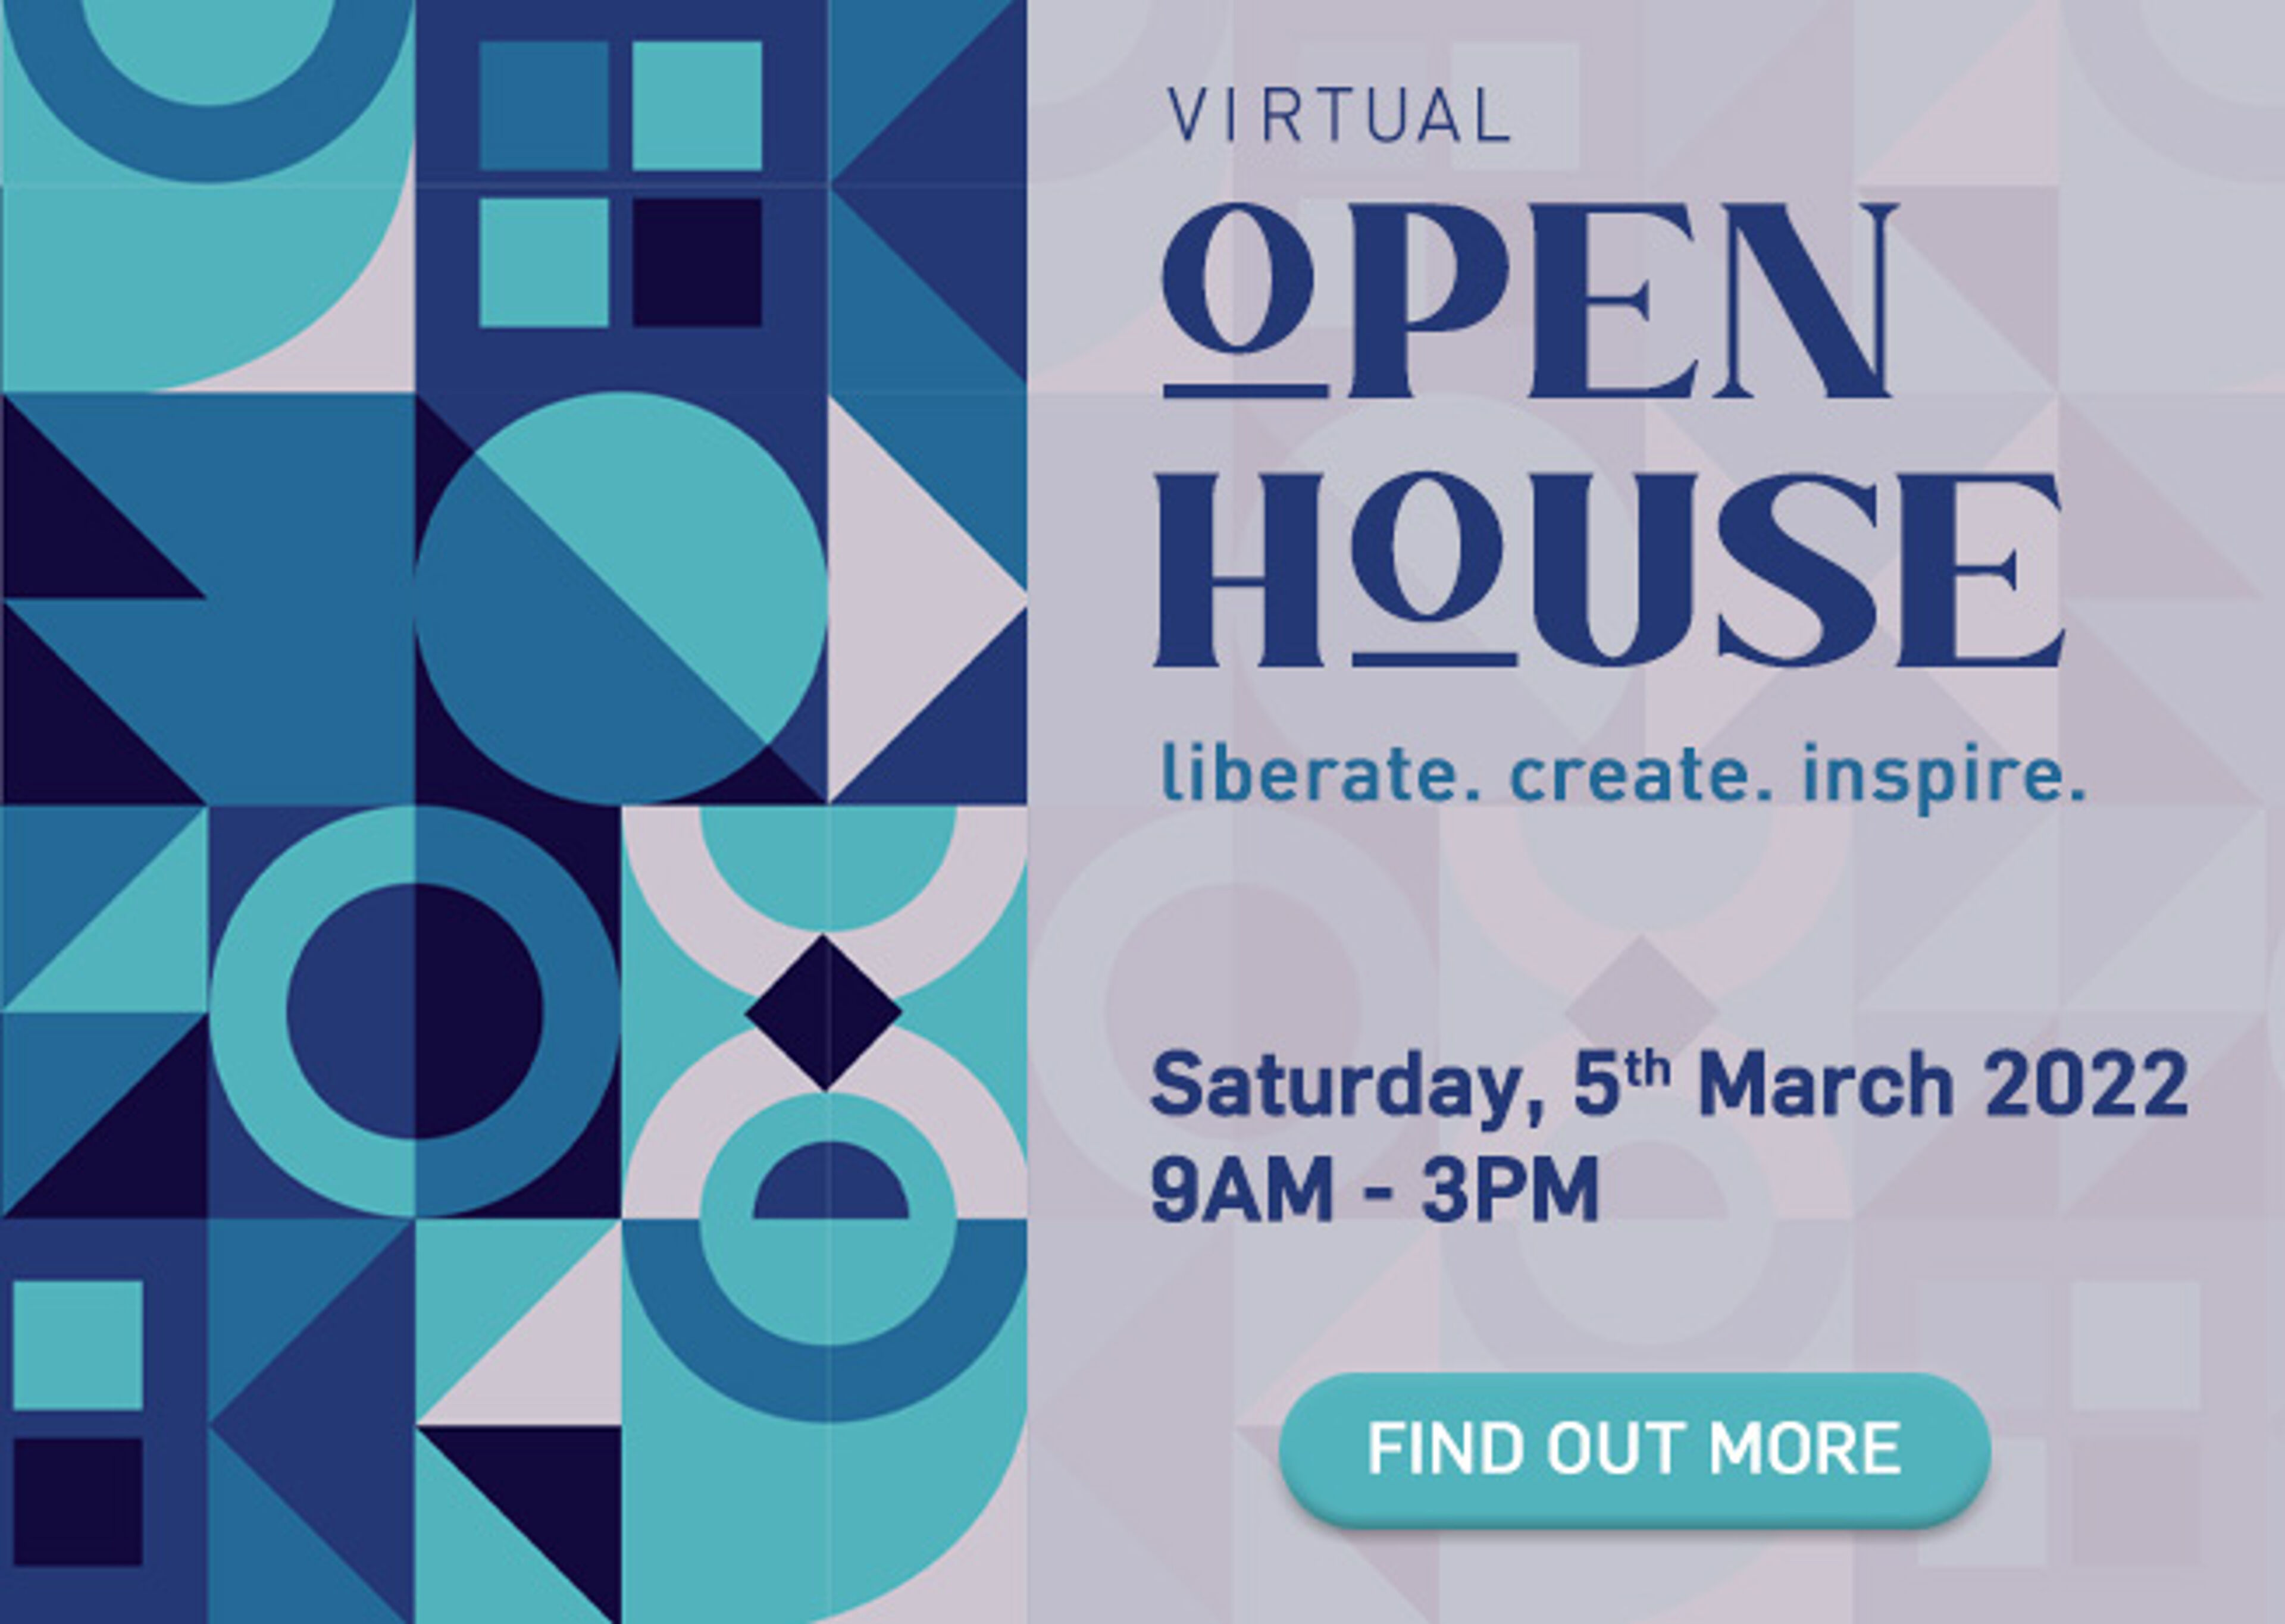 An advertisement for a virtual open house event, featuring bold geometric designs and details of the event on Saturday, 5th March 2022.